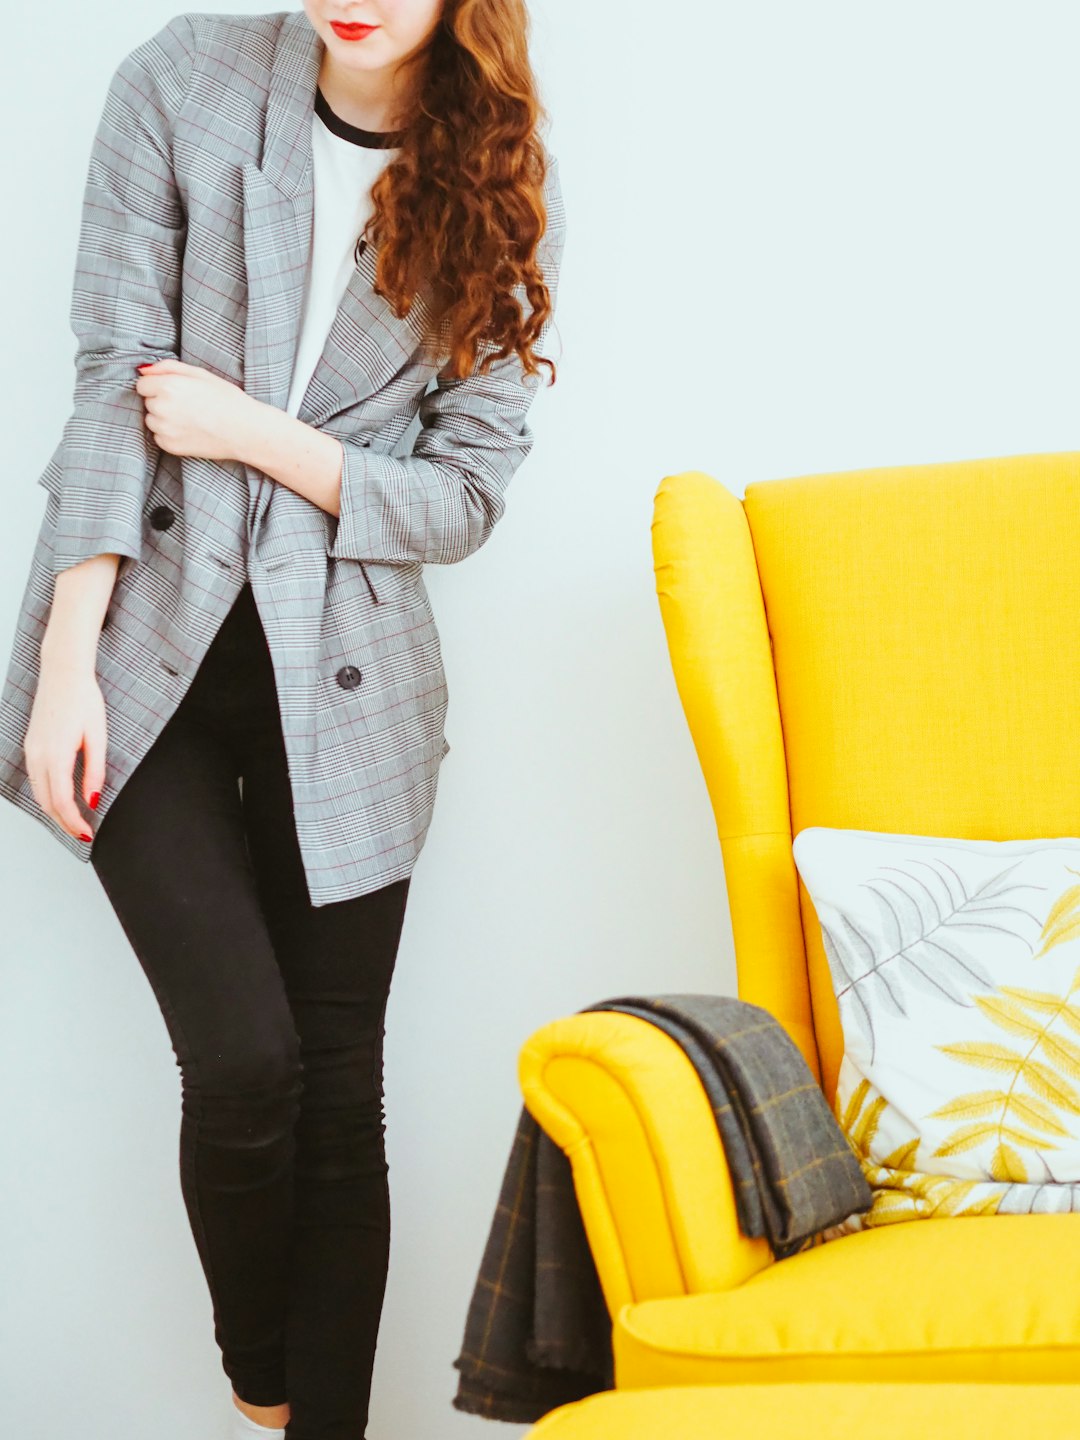 woman in gray blazer and black pants standing beside yellow sofa